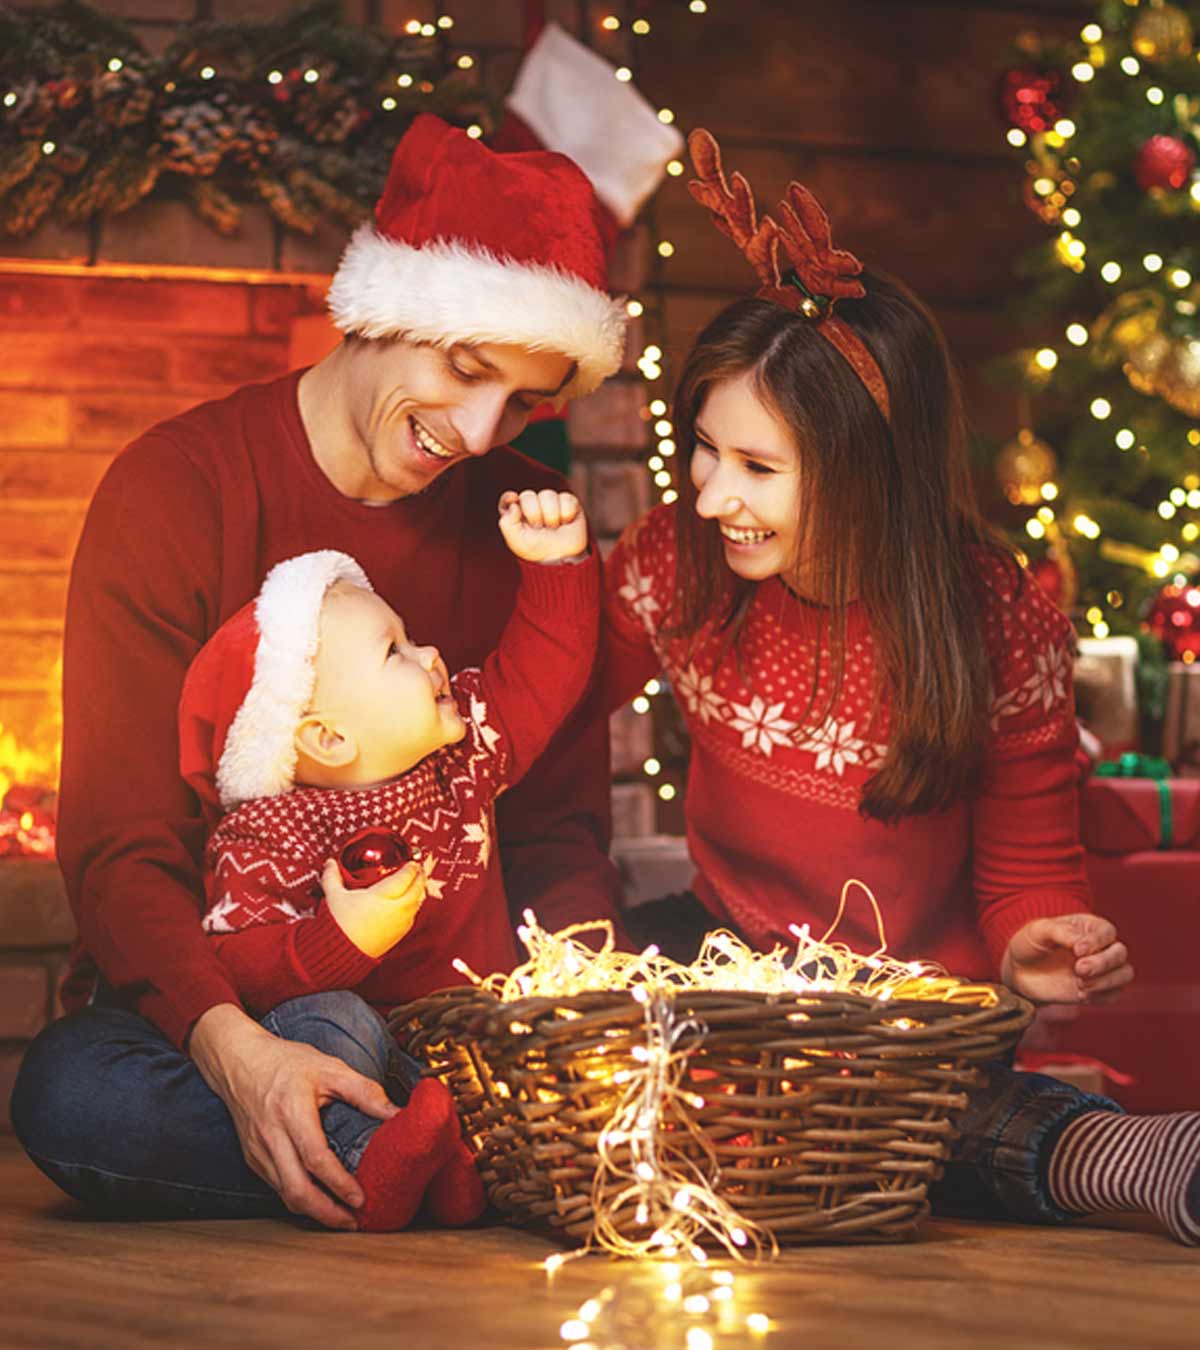 Beautiful Ideas To Make Baby's First Christmas Special